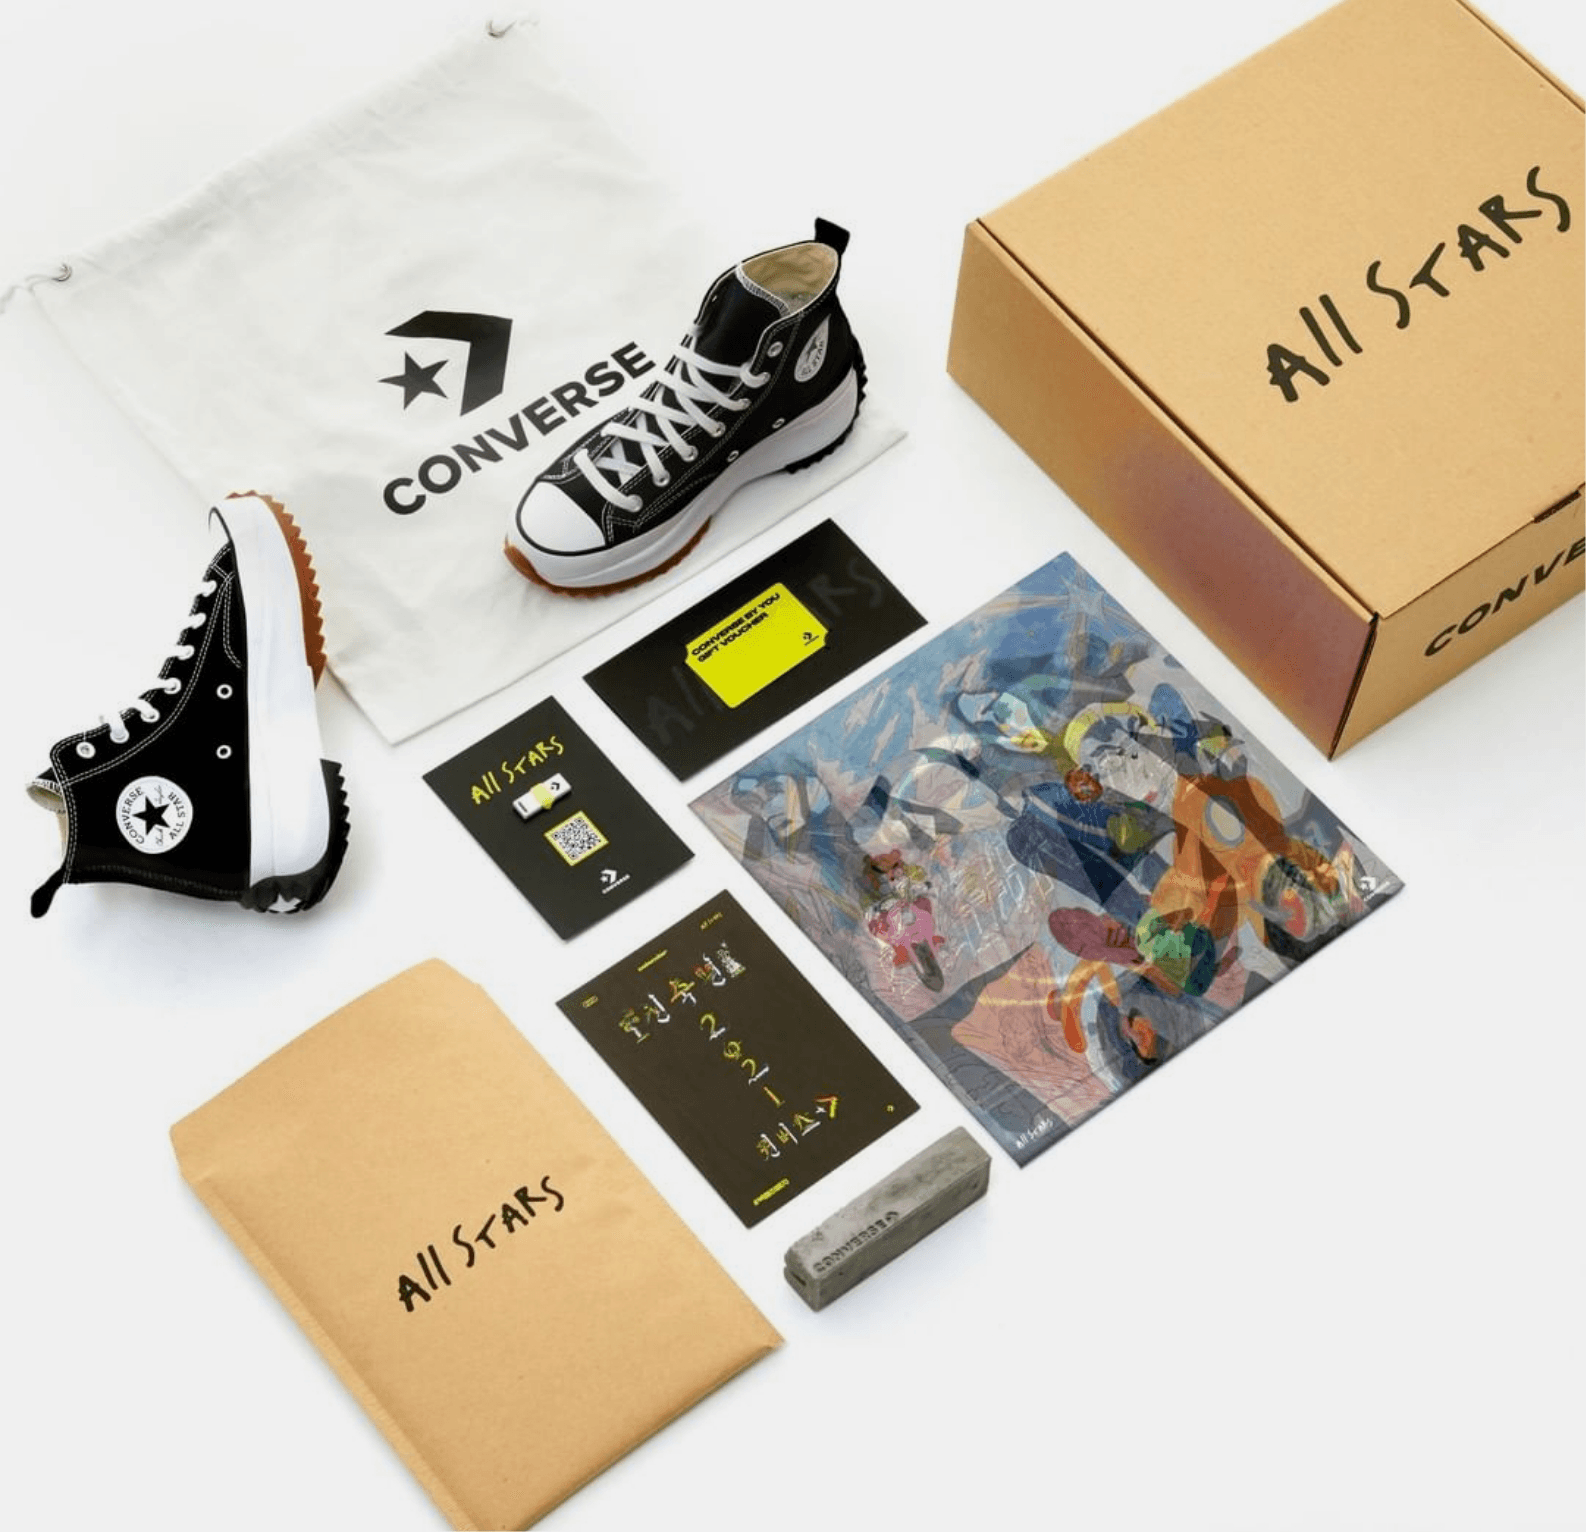 Converse All Star Series seeding package including new All Star sneakers, canvas bag, All Stars Envelope, promotional prints